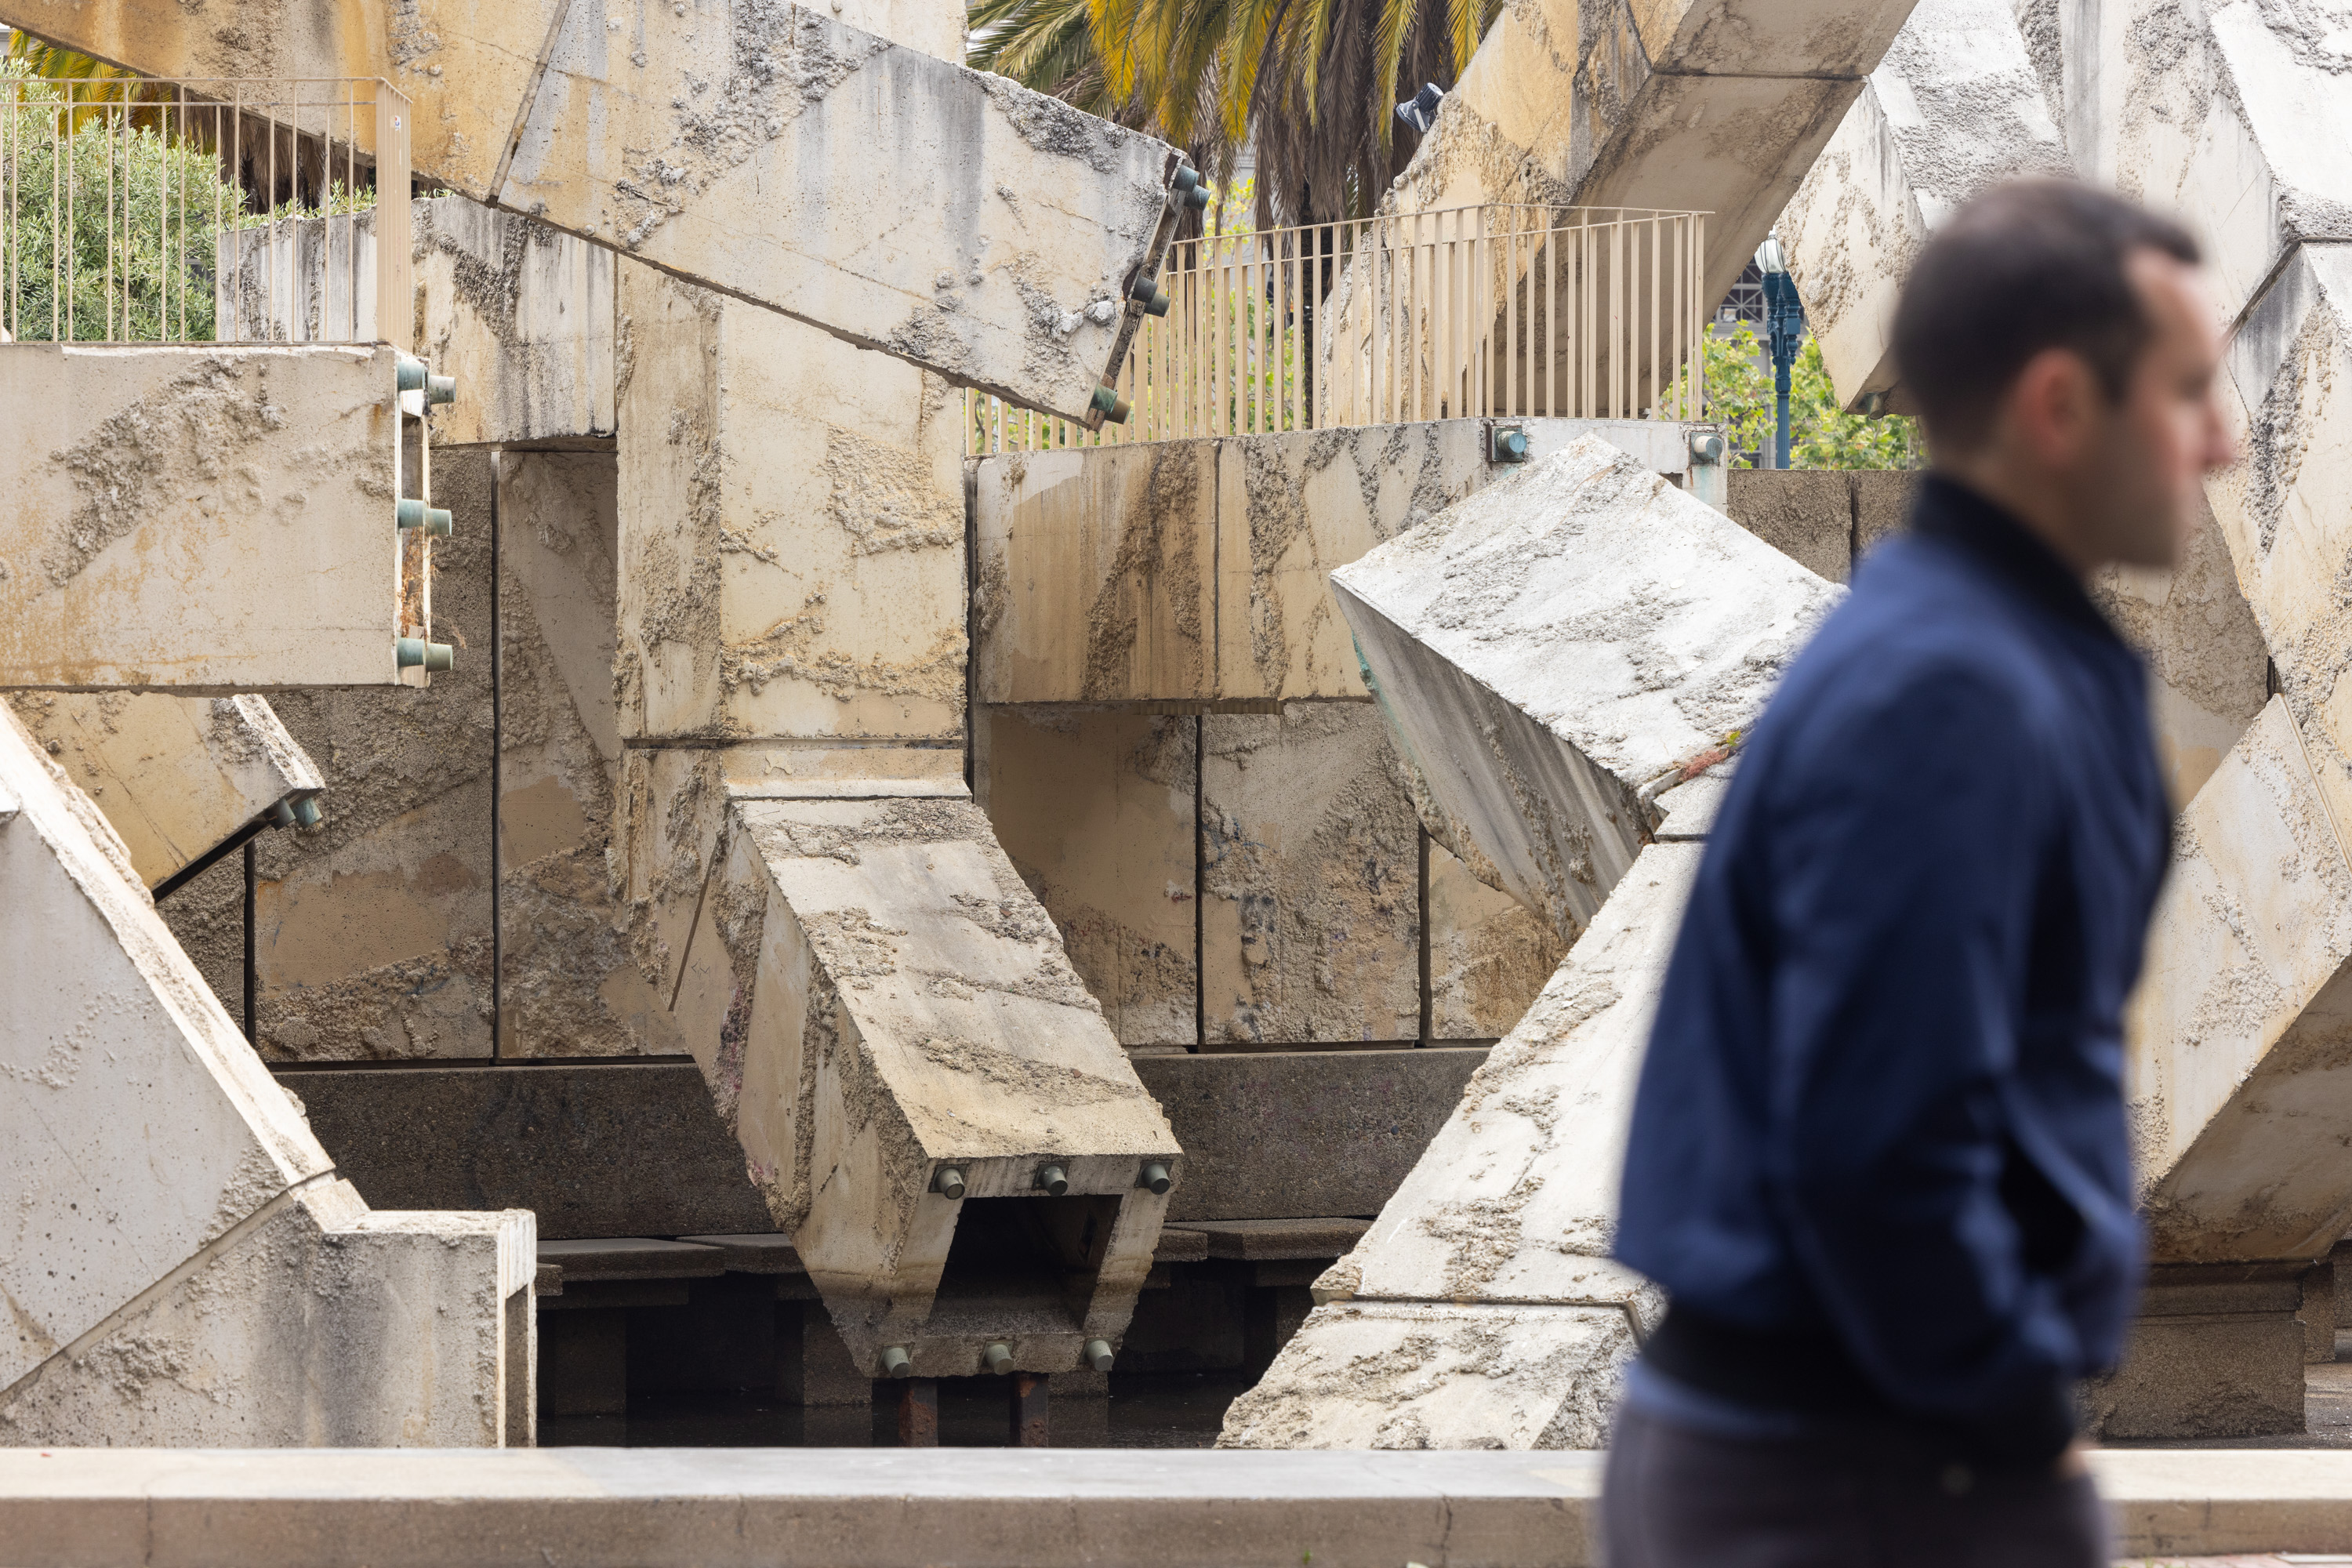 A person in a blue jacket walks past a large, abstract concrete sculpture composed of irregular, weathered geometric shapes, with a palm tree slightly visible in the background.